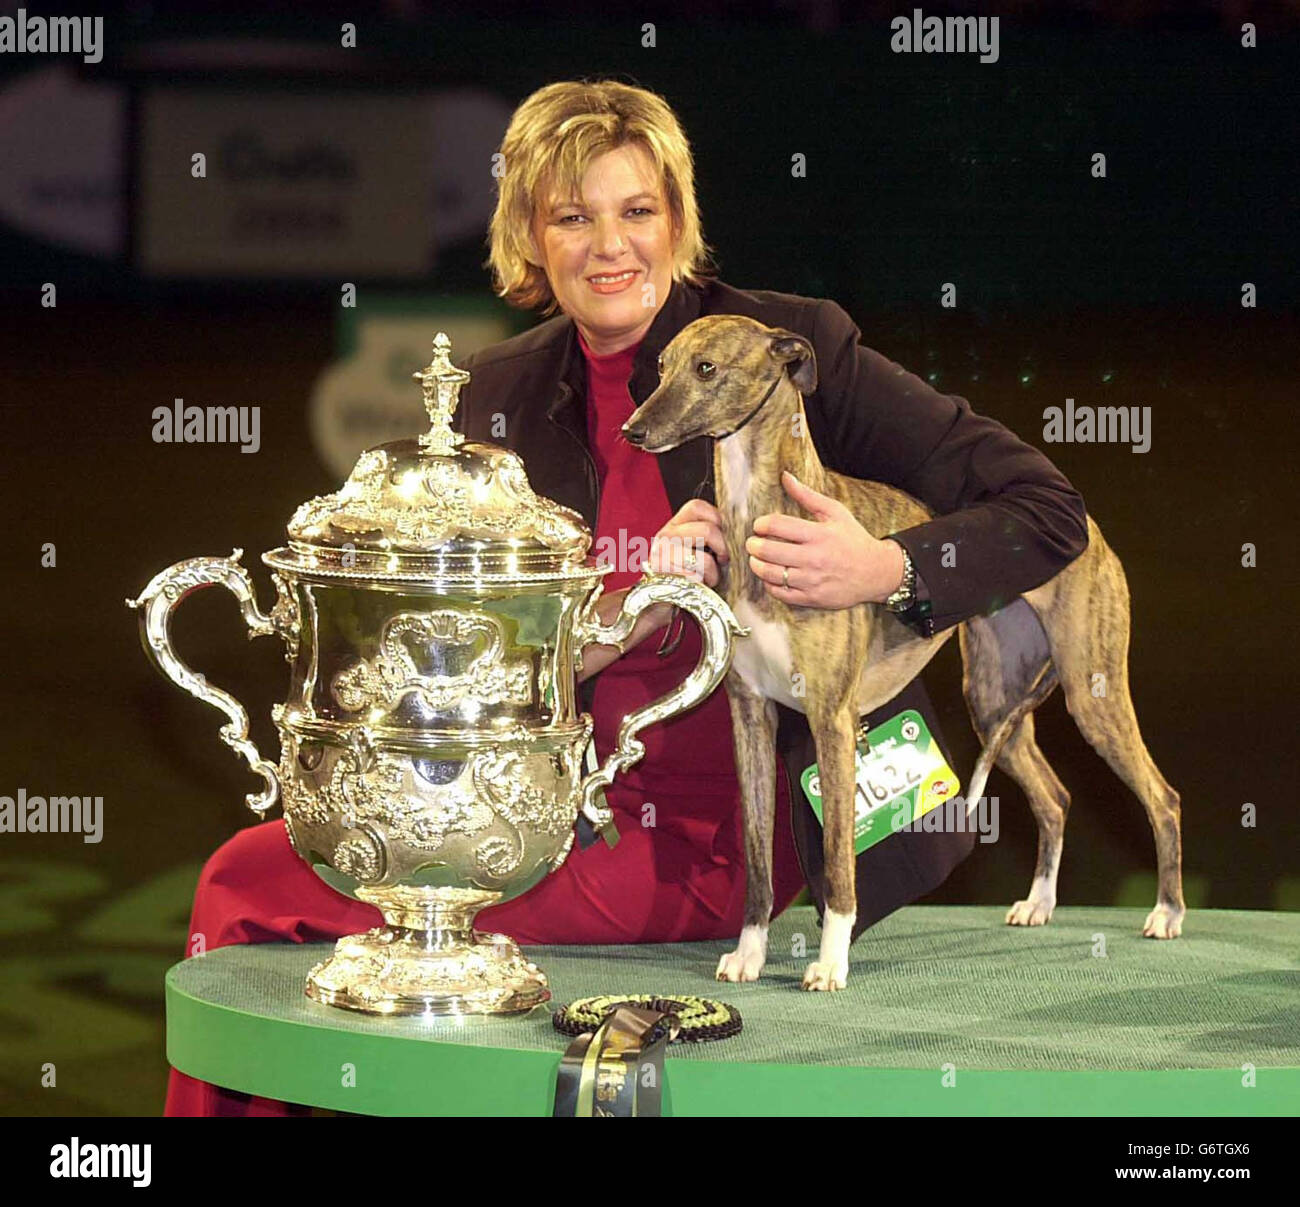 Deedee the whippet, with her owner Lynne Yacoby-Wright of Mellor, Stockport, after it was named as as overall winner of the 101st Crufts show at the National Exhibition Centre in Birmingham. The three-year-old, whose show name is Cobyco Call The Tune, beat six other competitors to win the Best in Show competition - the most prestigious title of the four day event. Stock Photo